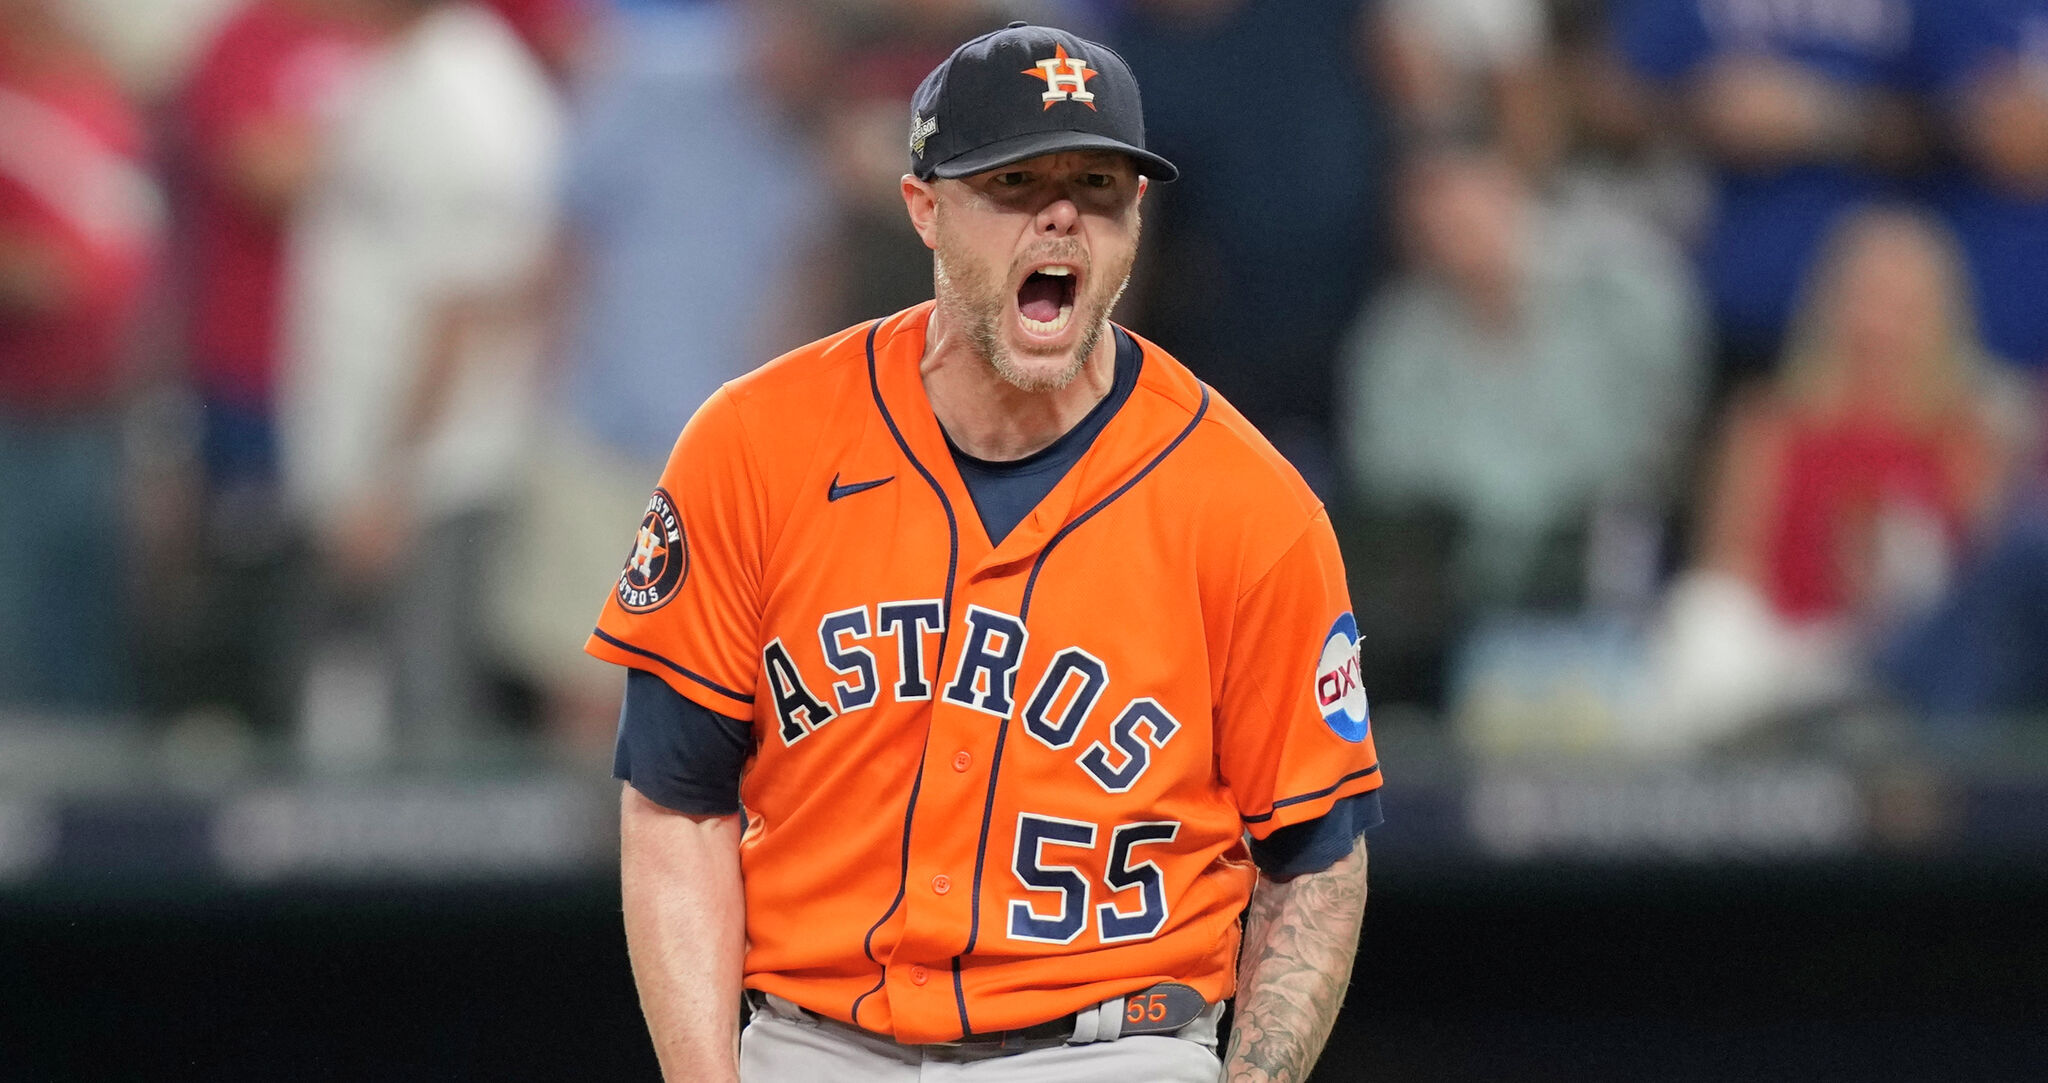 PLAY OF THE YEAR: Astros' Chas McCormick preserves Game 5 win with